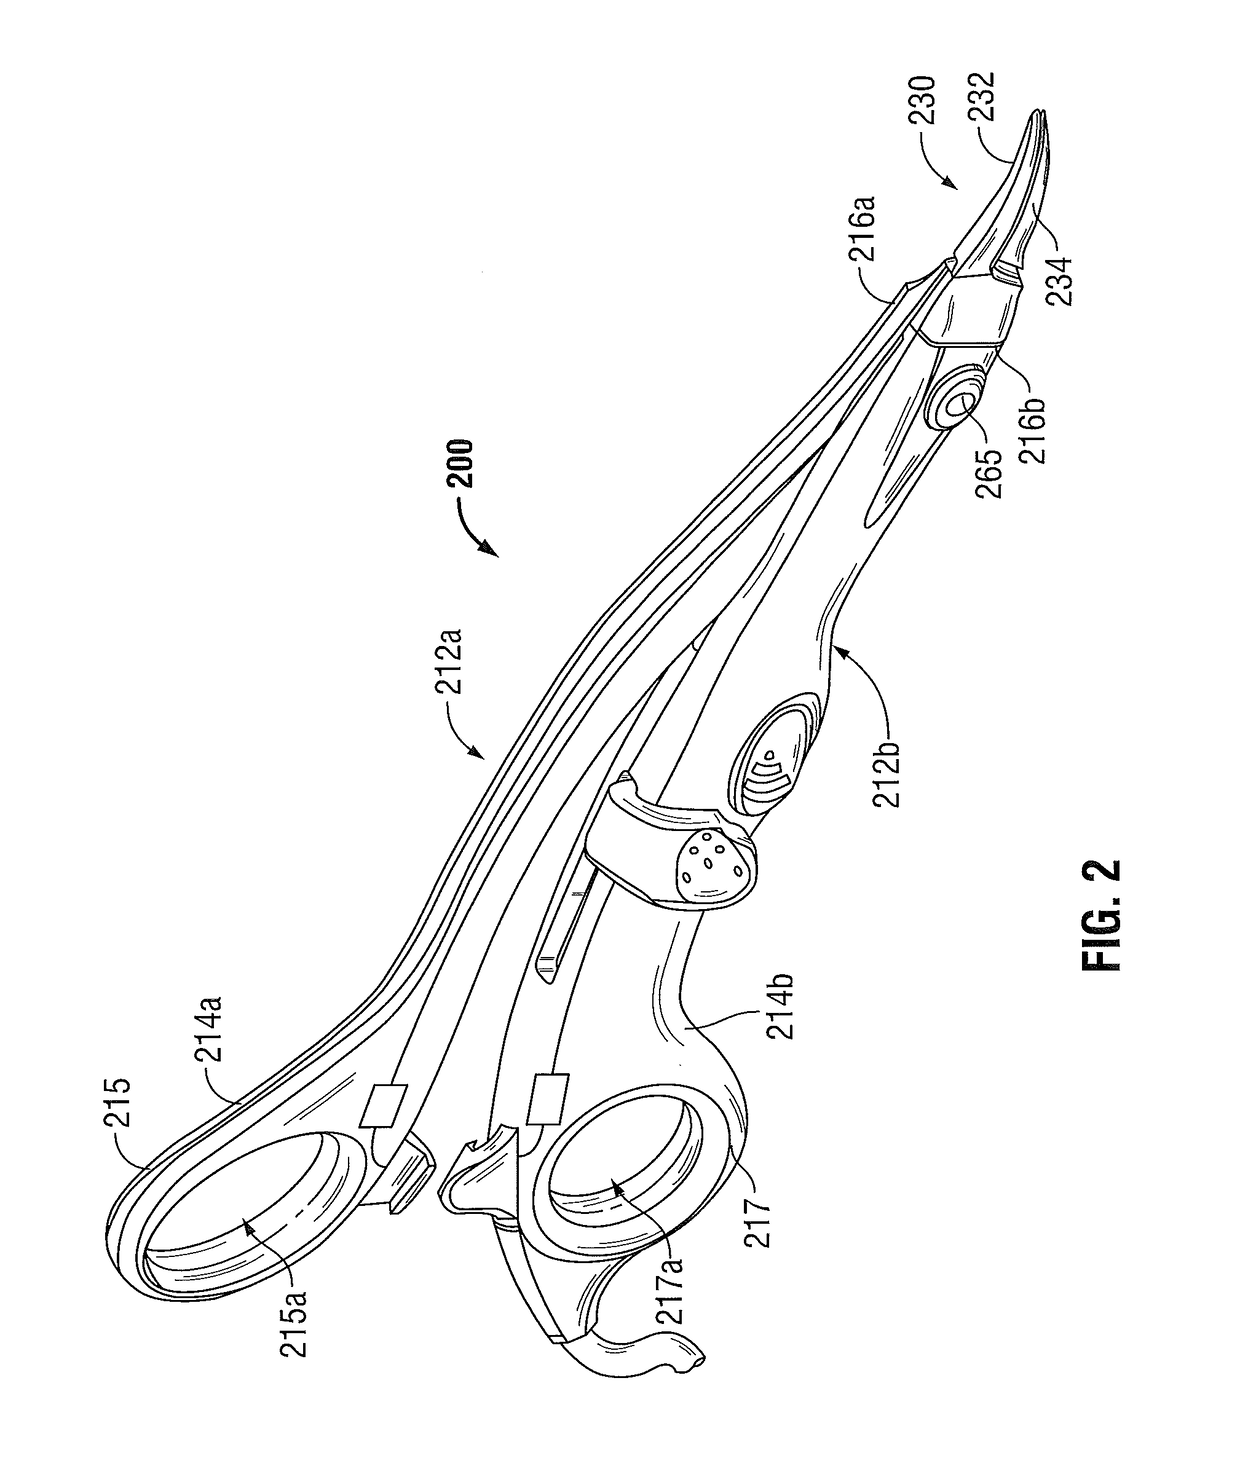 Jaw assemblies for electrosurgical instruments and methods of manufacturing jaw assemblies